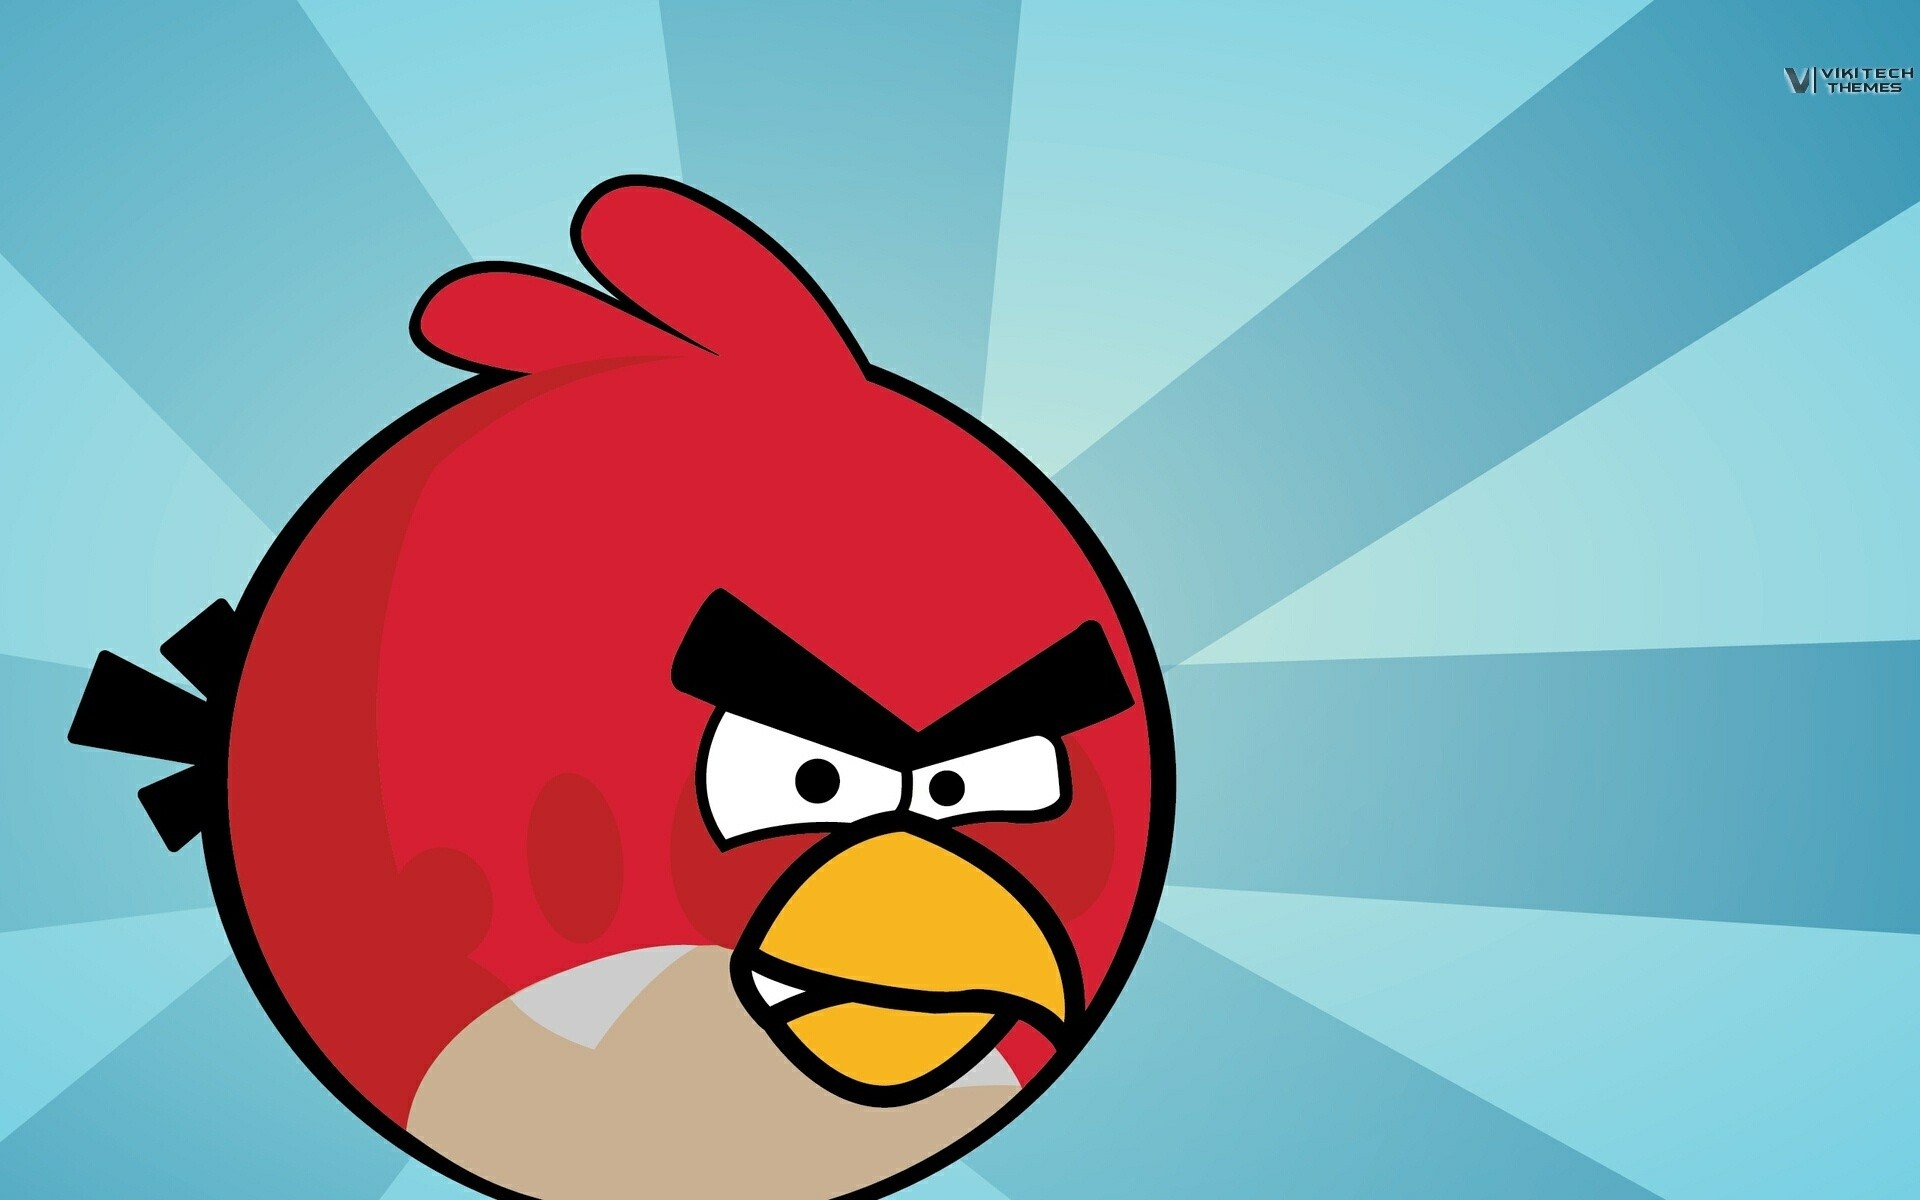 angry birds space hd wallpapers